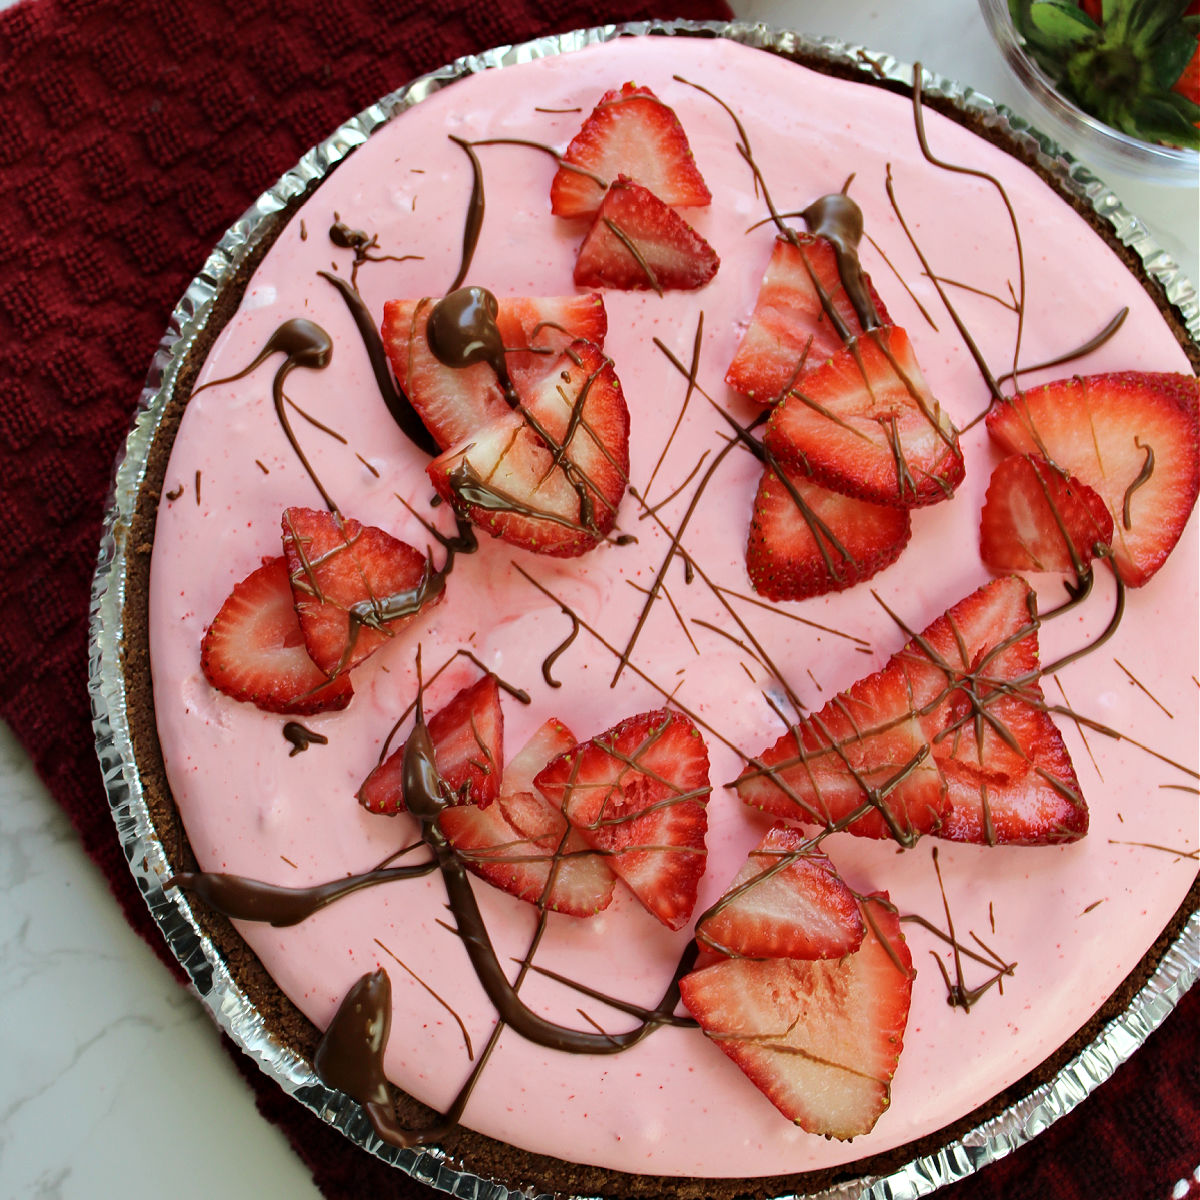 Strawberry pie with strawberries and drizzled chocolate on top.